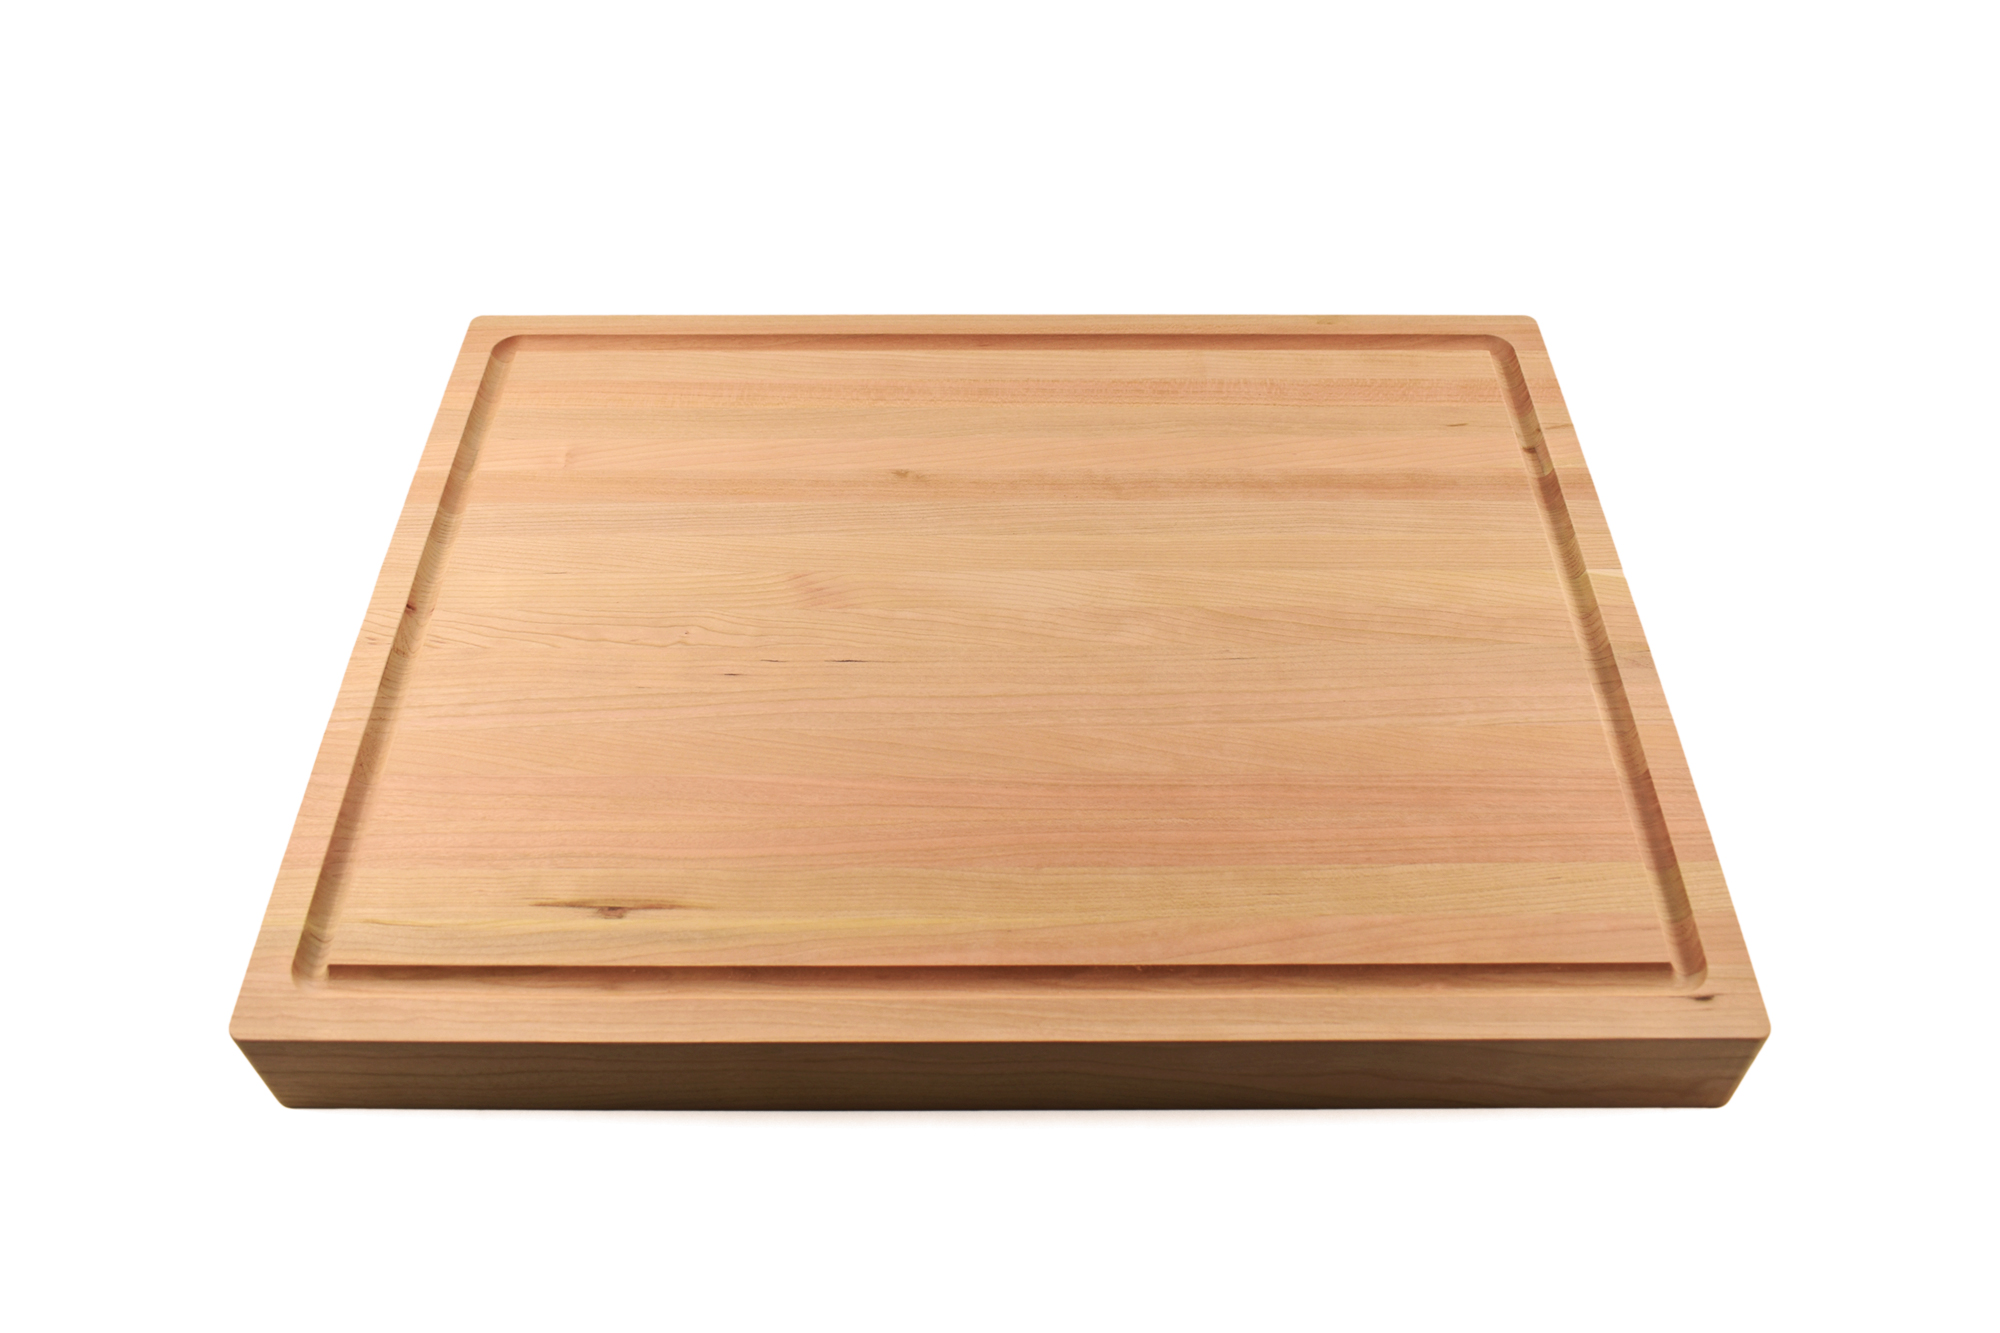 LARGE 1 3/4 INCH CHERRY BUTCHER BLOCK WITH JUICE GROOVE